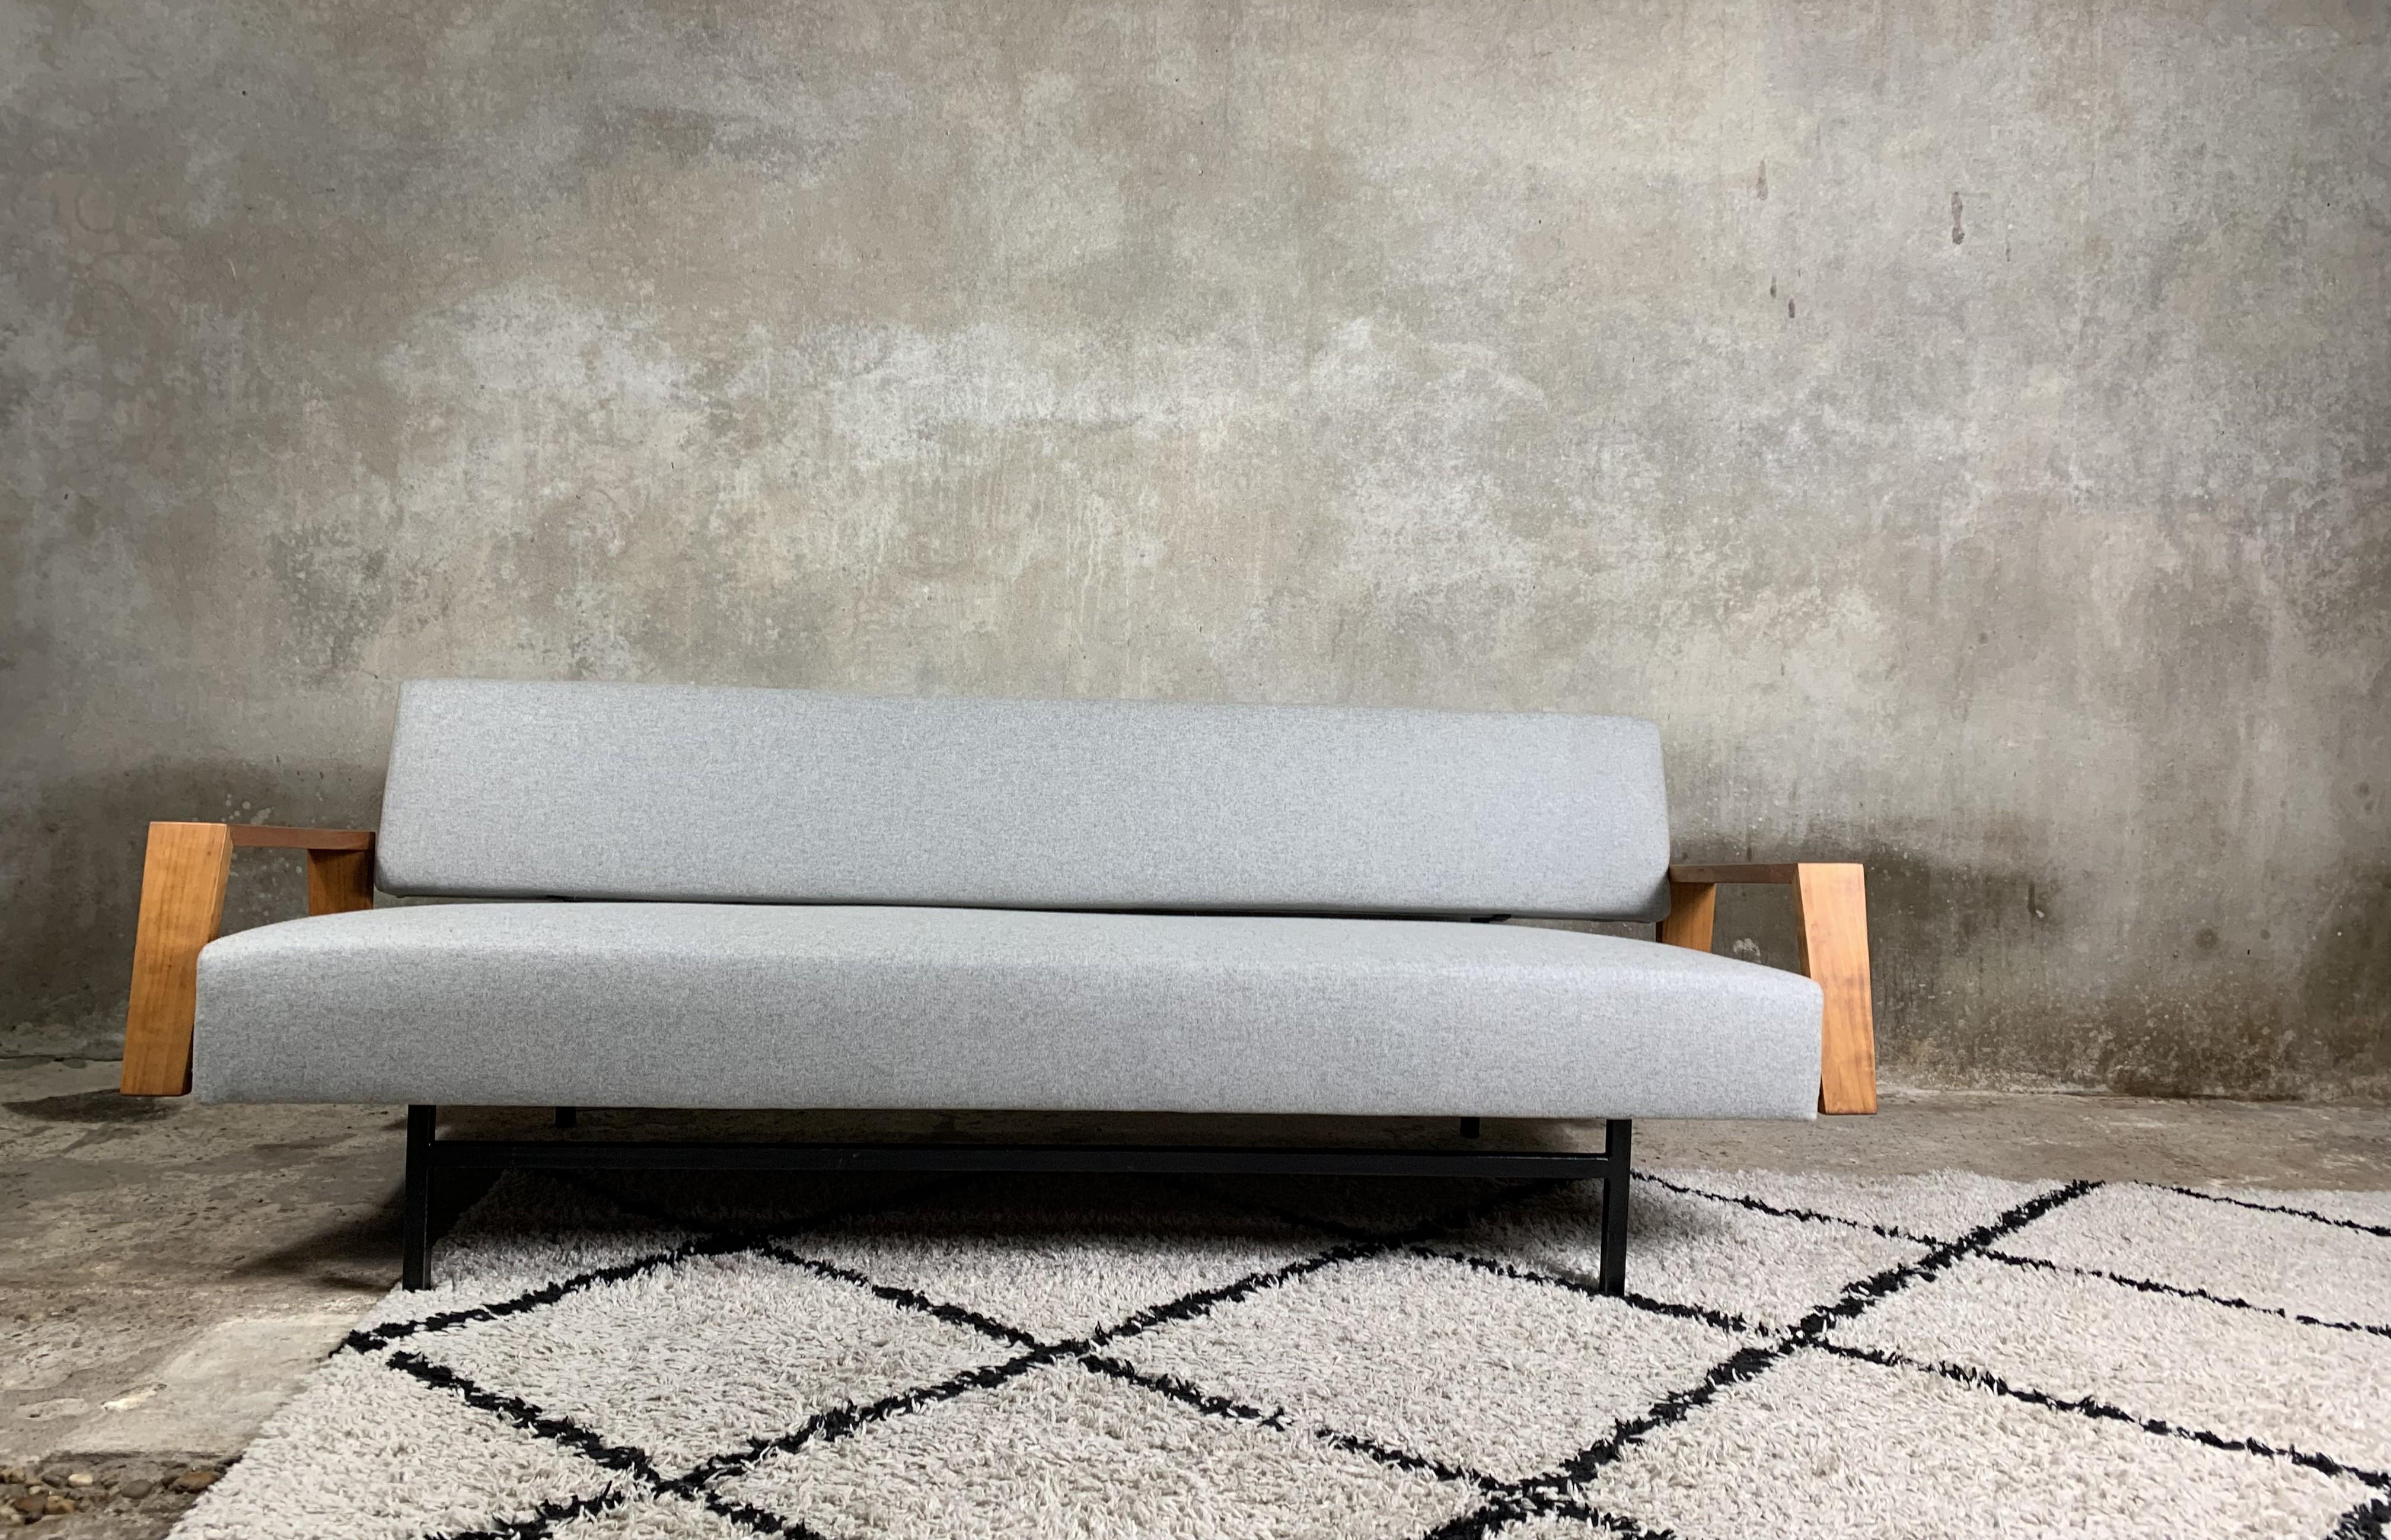 “Doublet” is a beautiful and rare find of Dutch mid-century design by Rob Parry. A square black metal frame, wooden armrests and a nice grey wool fabric upholstery. This combination of materials and colour works very well together, giving the piece